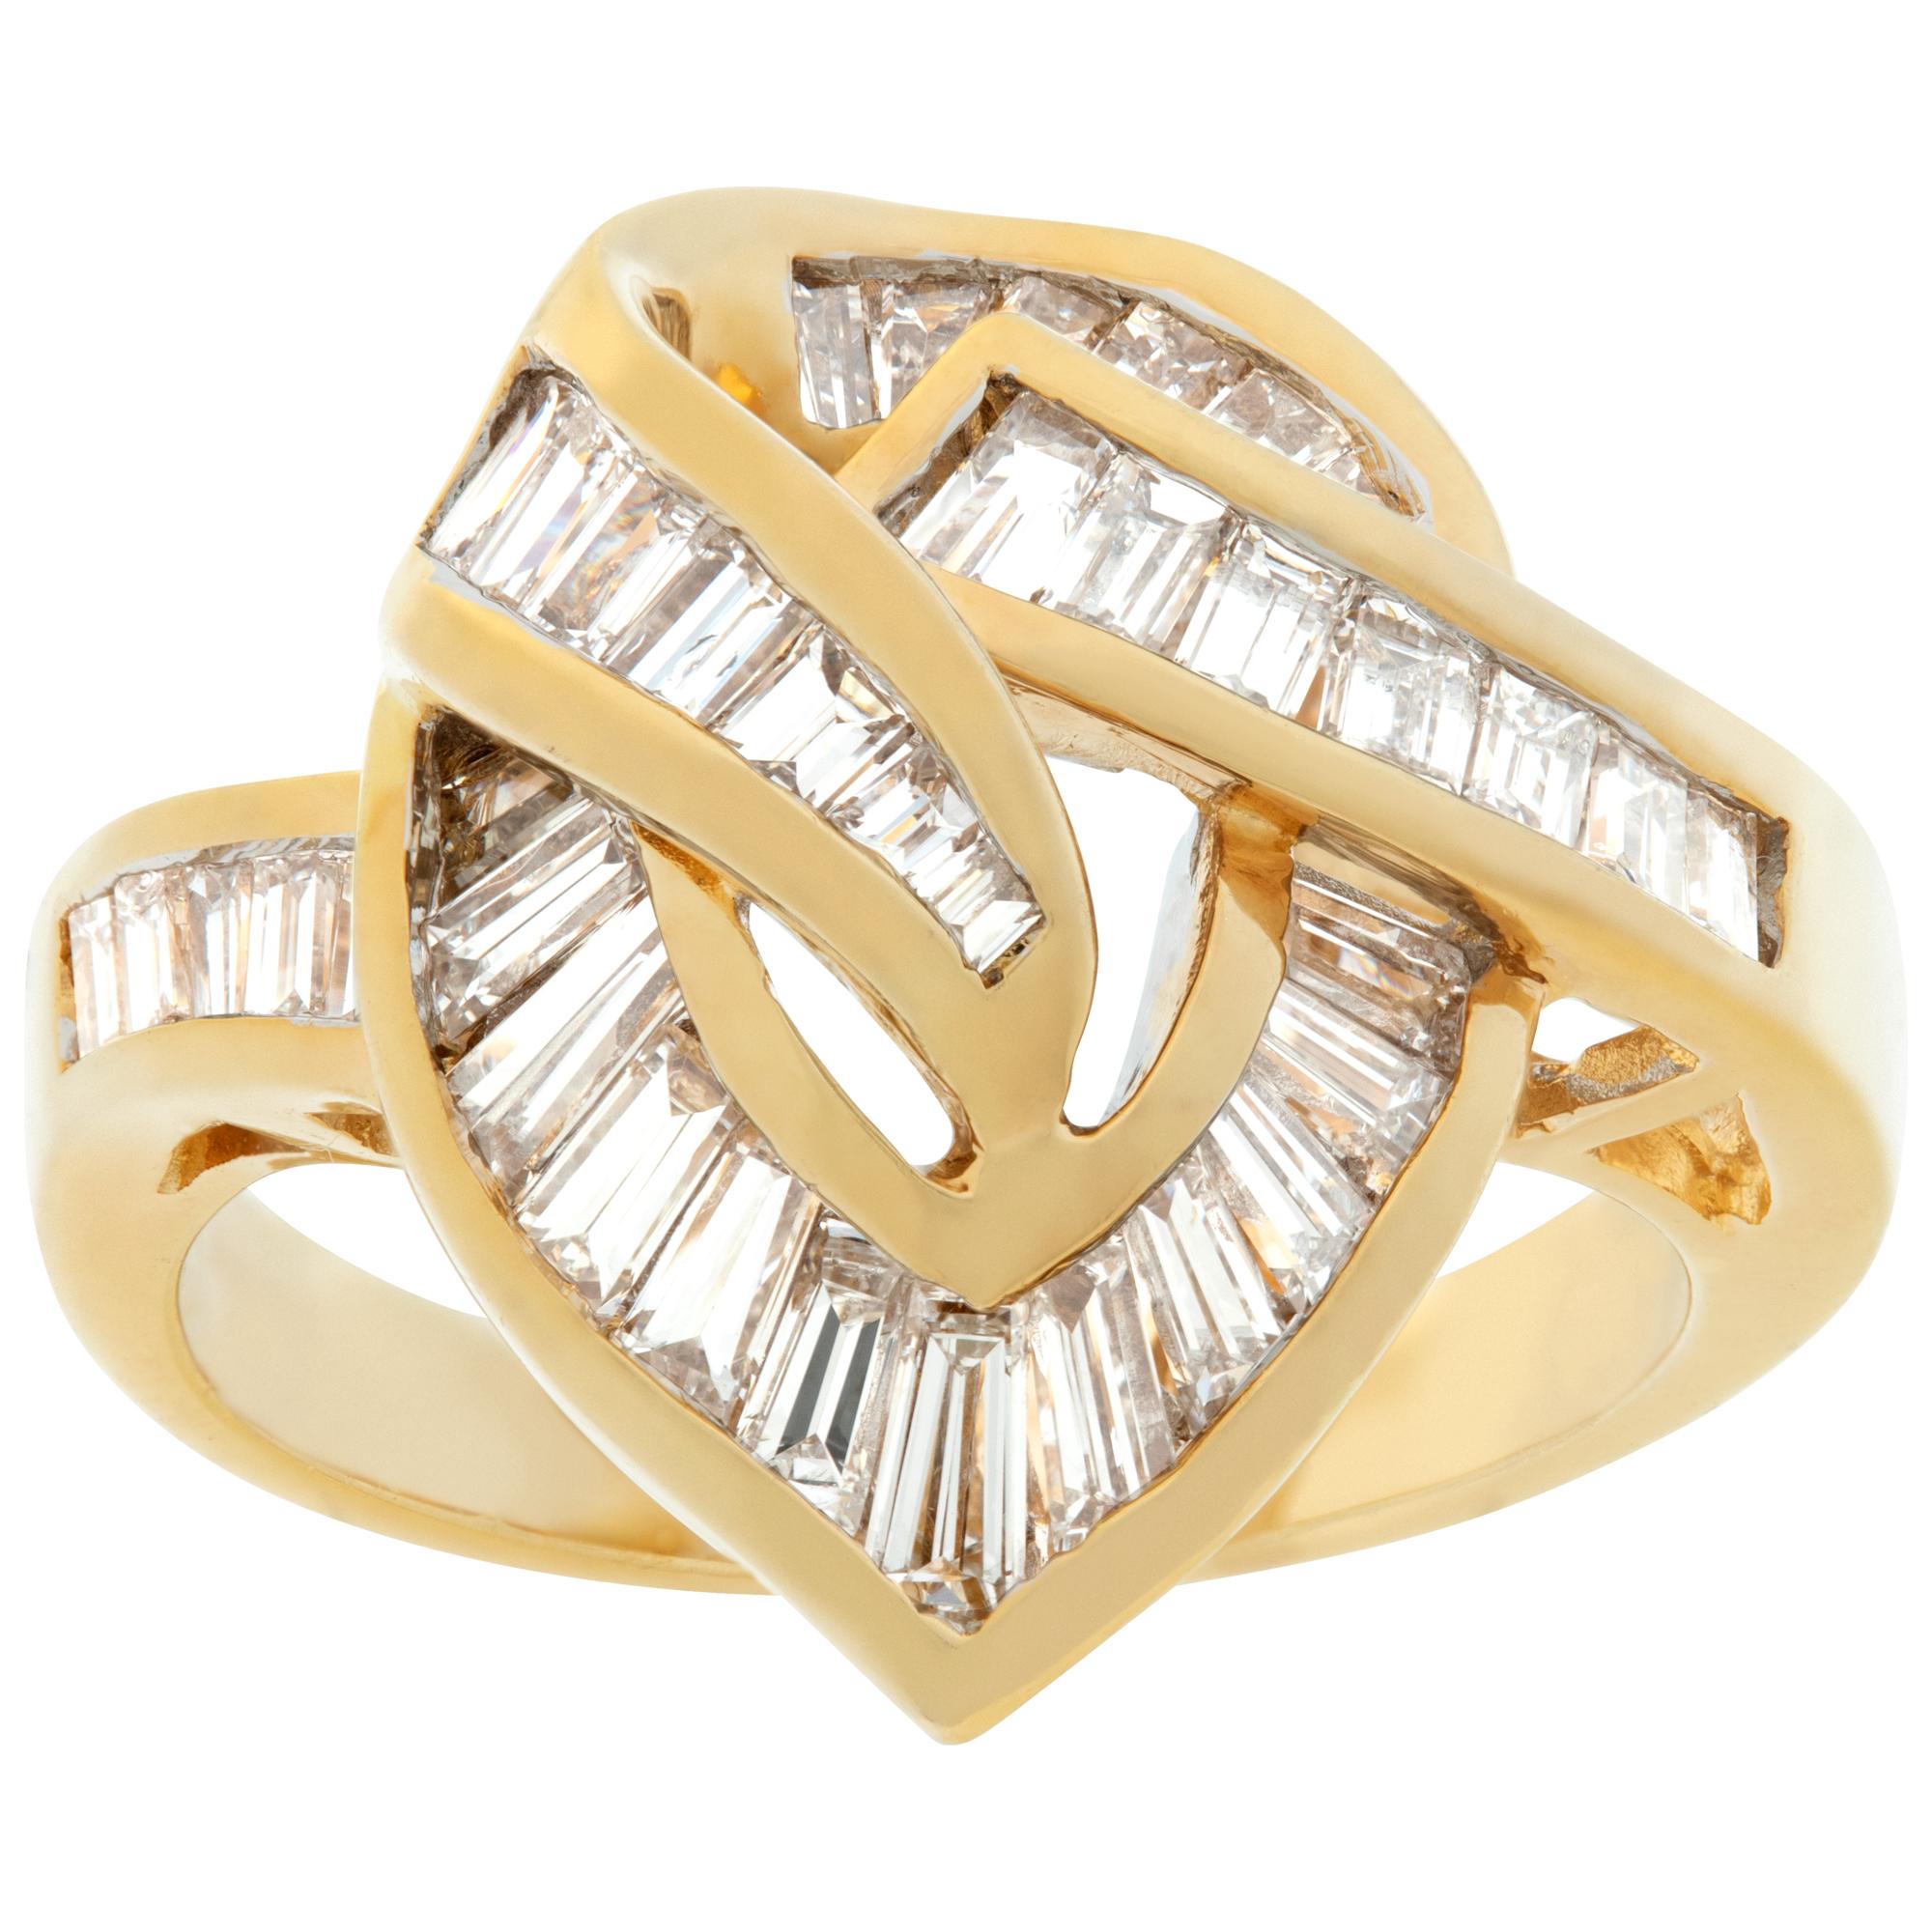 Yellow gold swirl of diamonds ring w/ around 3 carats in baguette diamonds For Sale